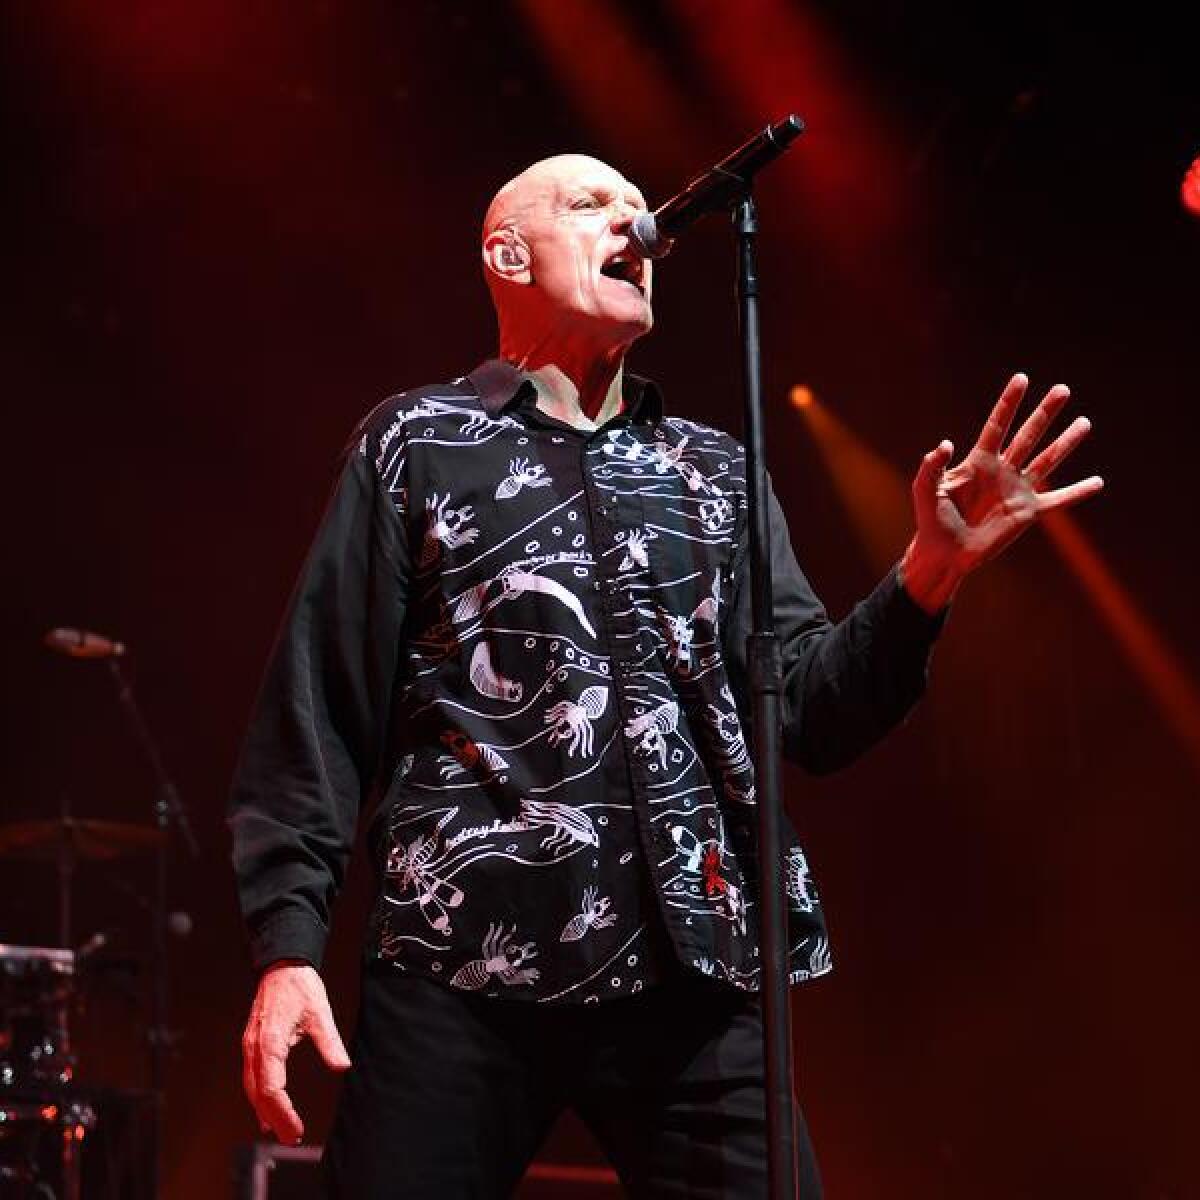 Singer Peter Garrett performs with his band Midnight Oil.